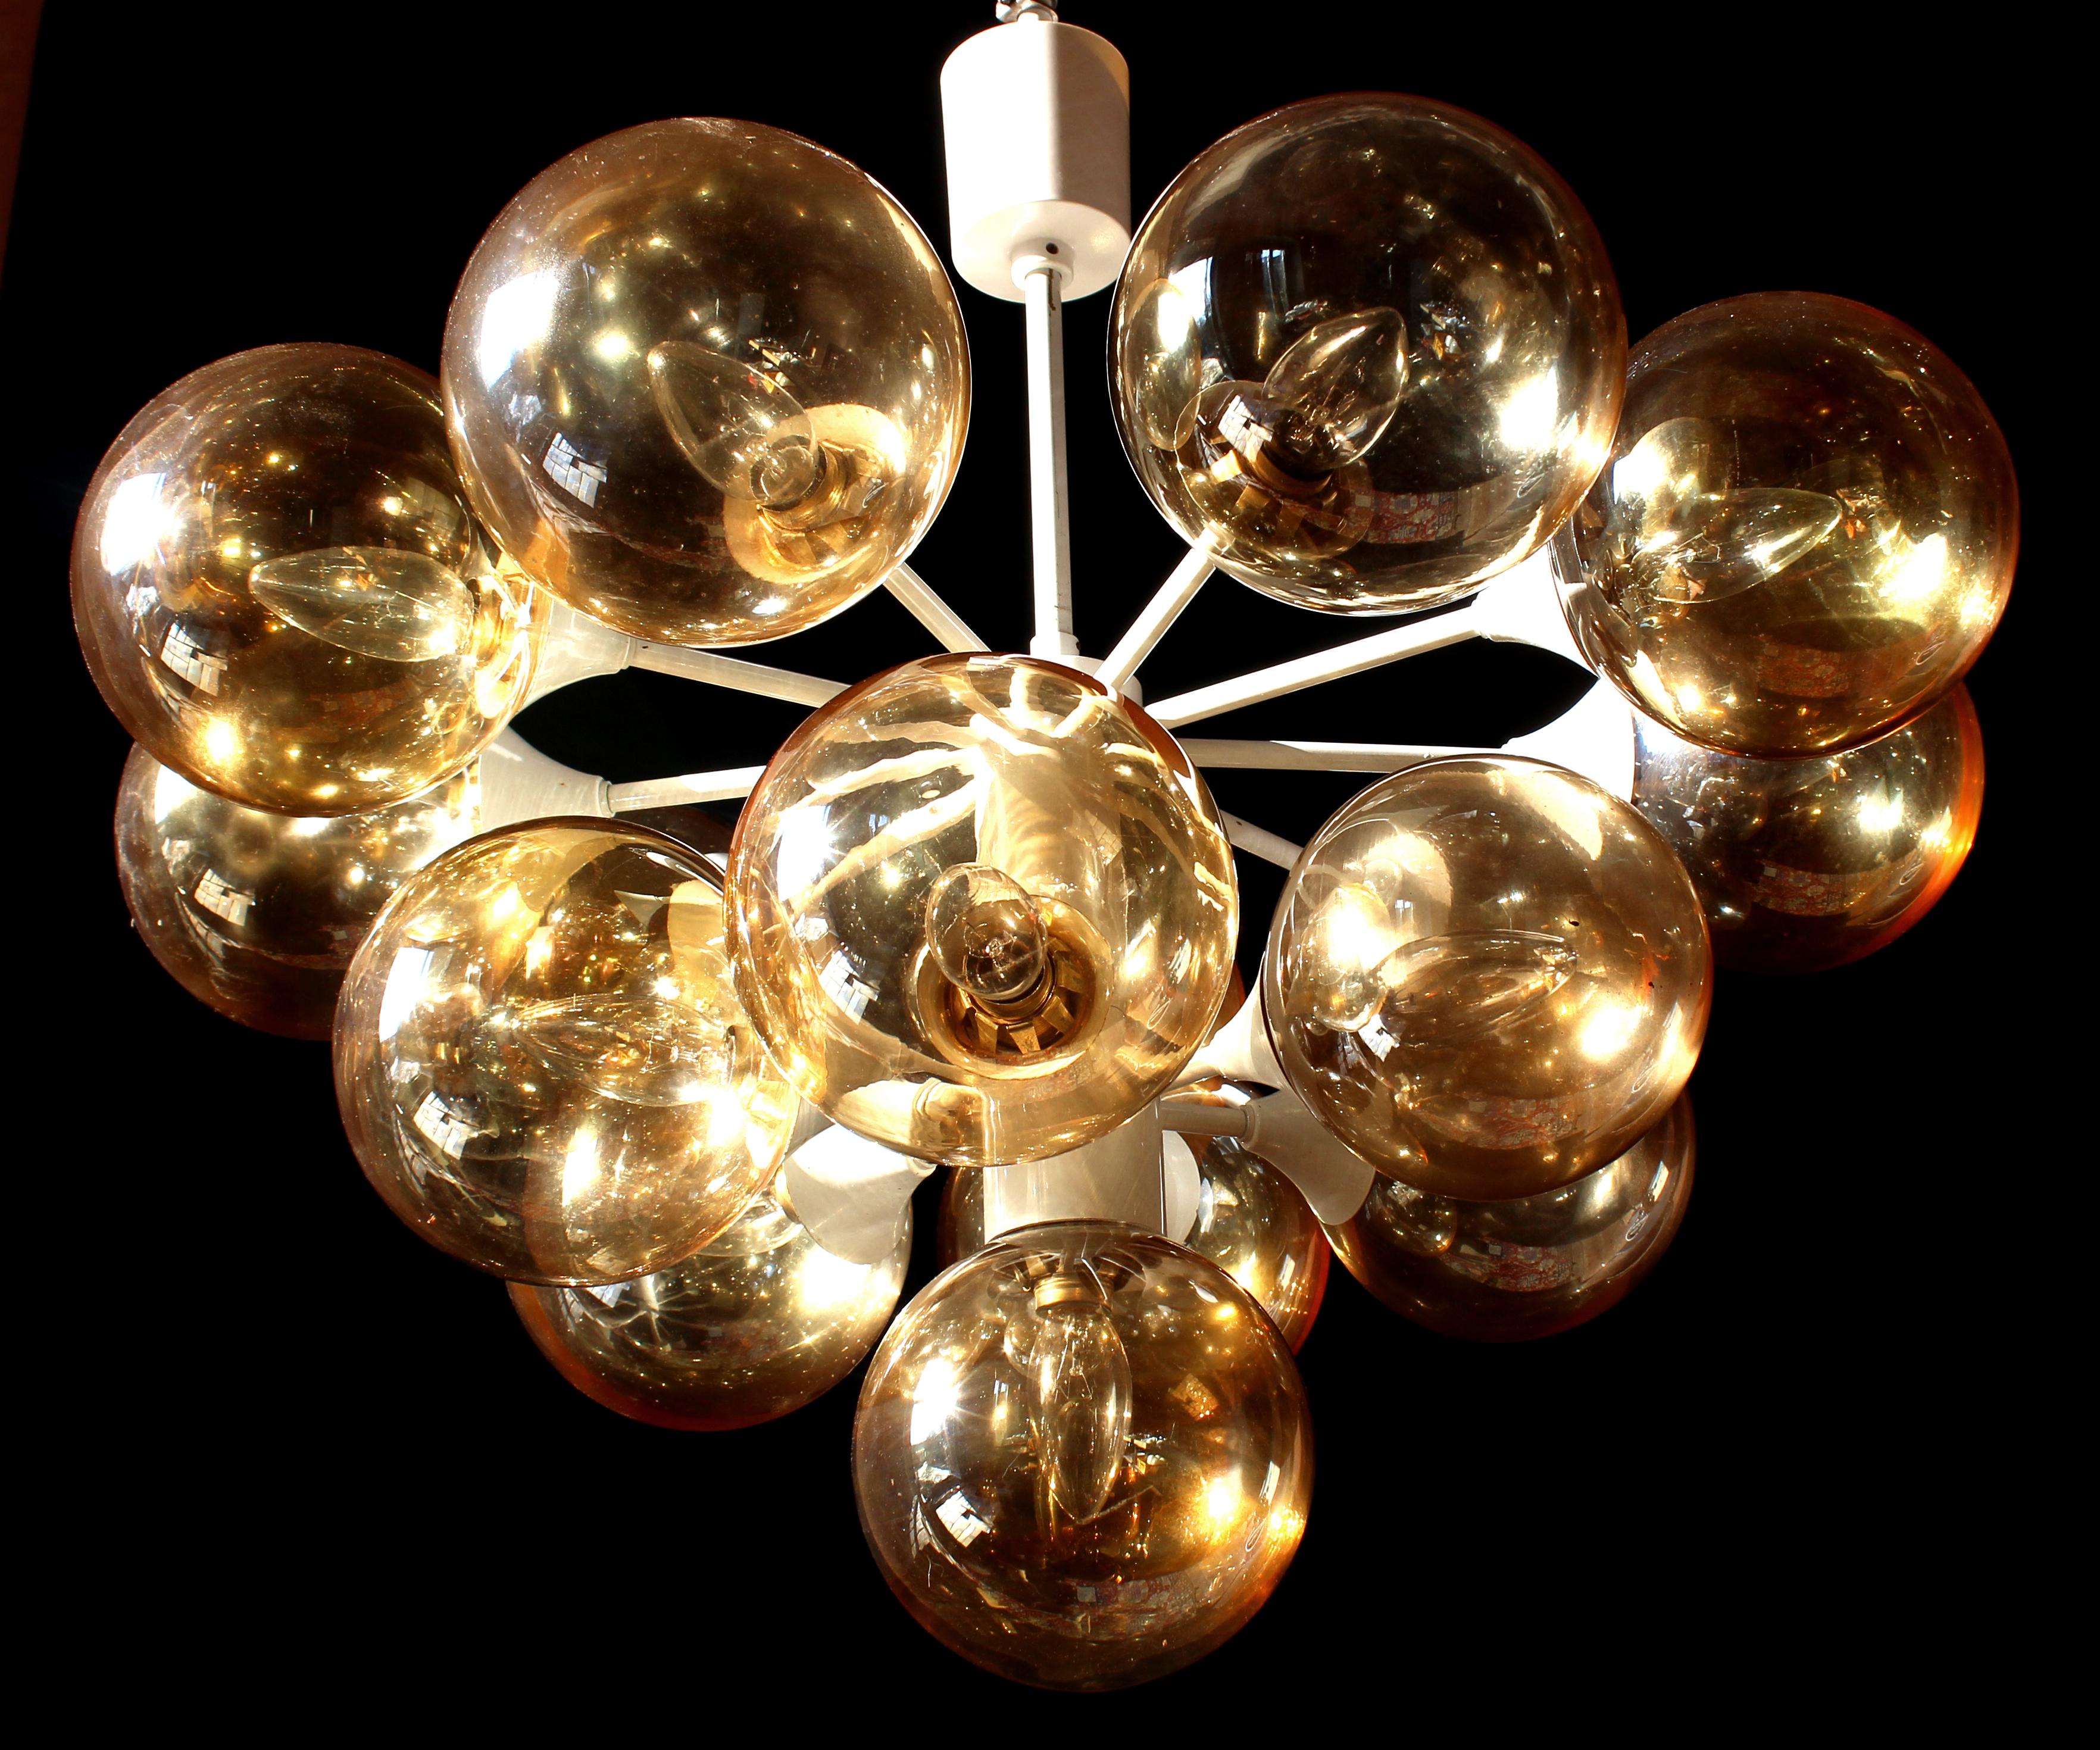 Organic chandelier 1970s with 16 opal glass globes by Kaiser. Lights: E14.

Measure: Diameter 25.5